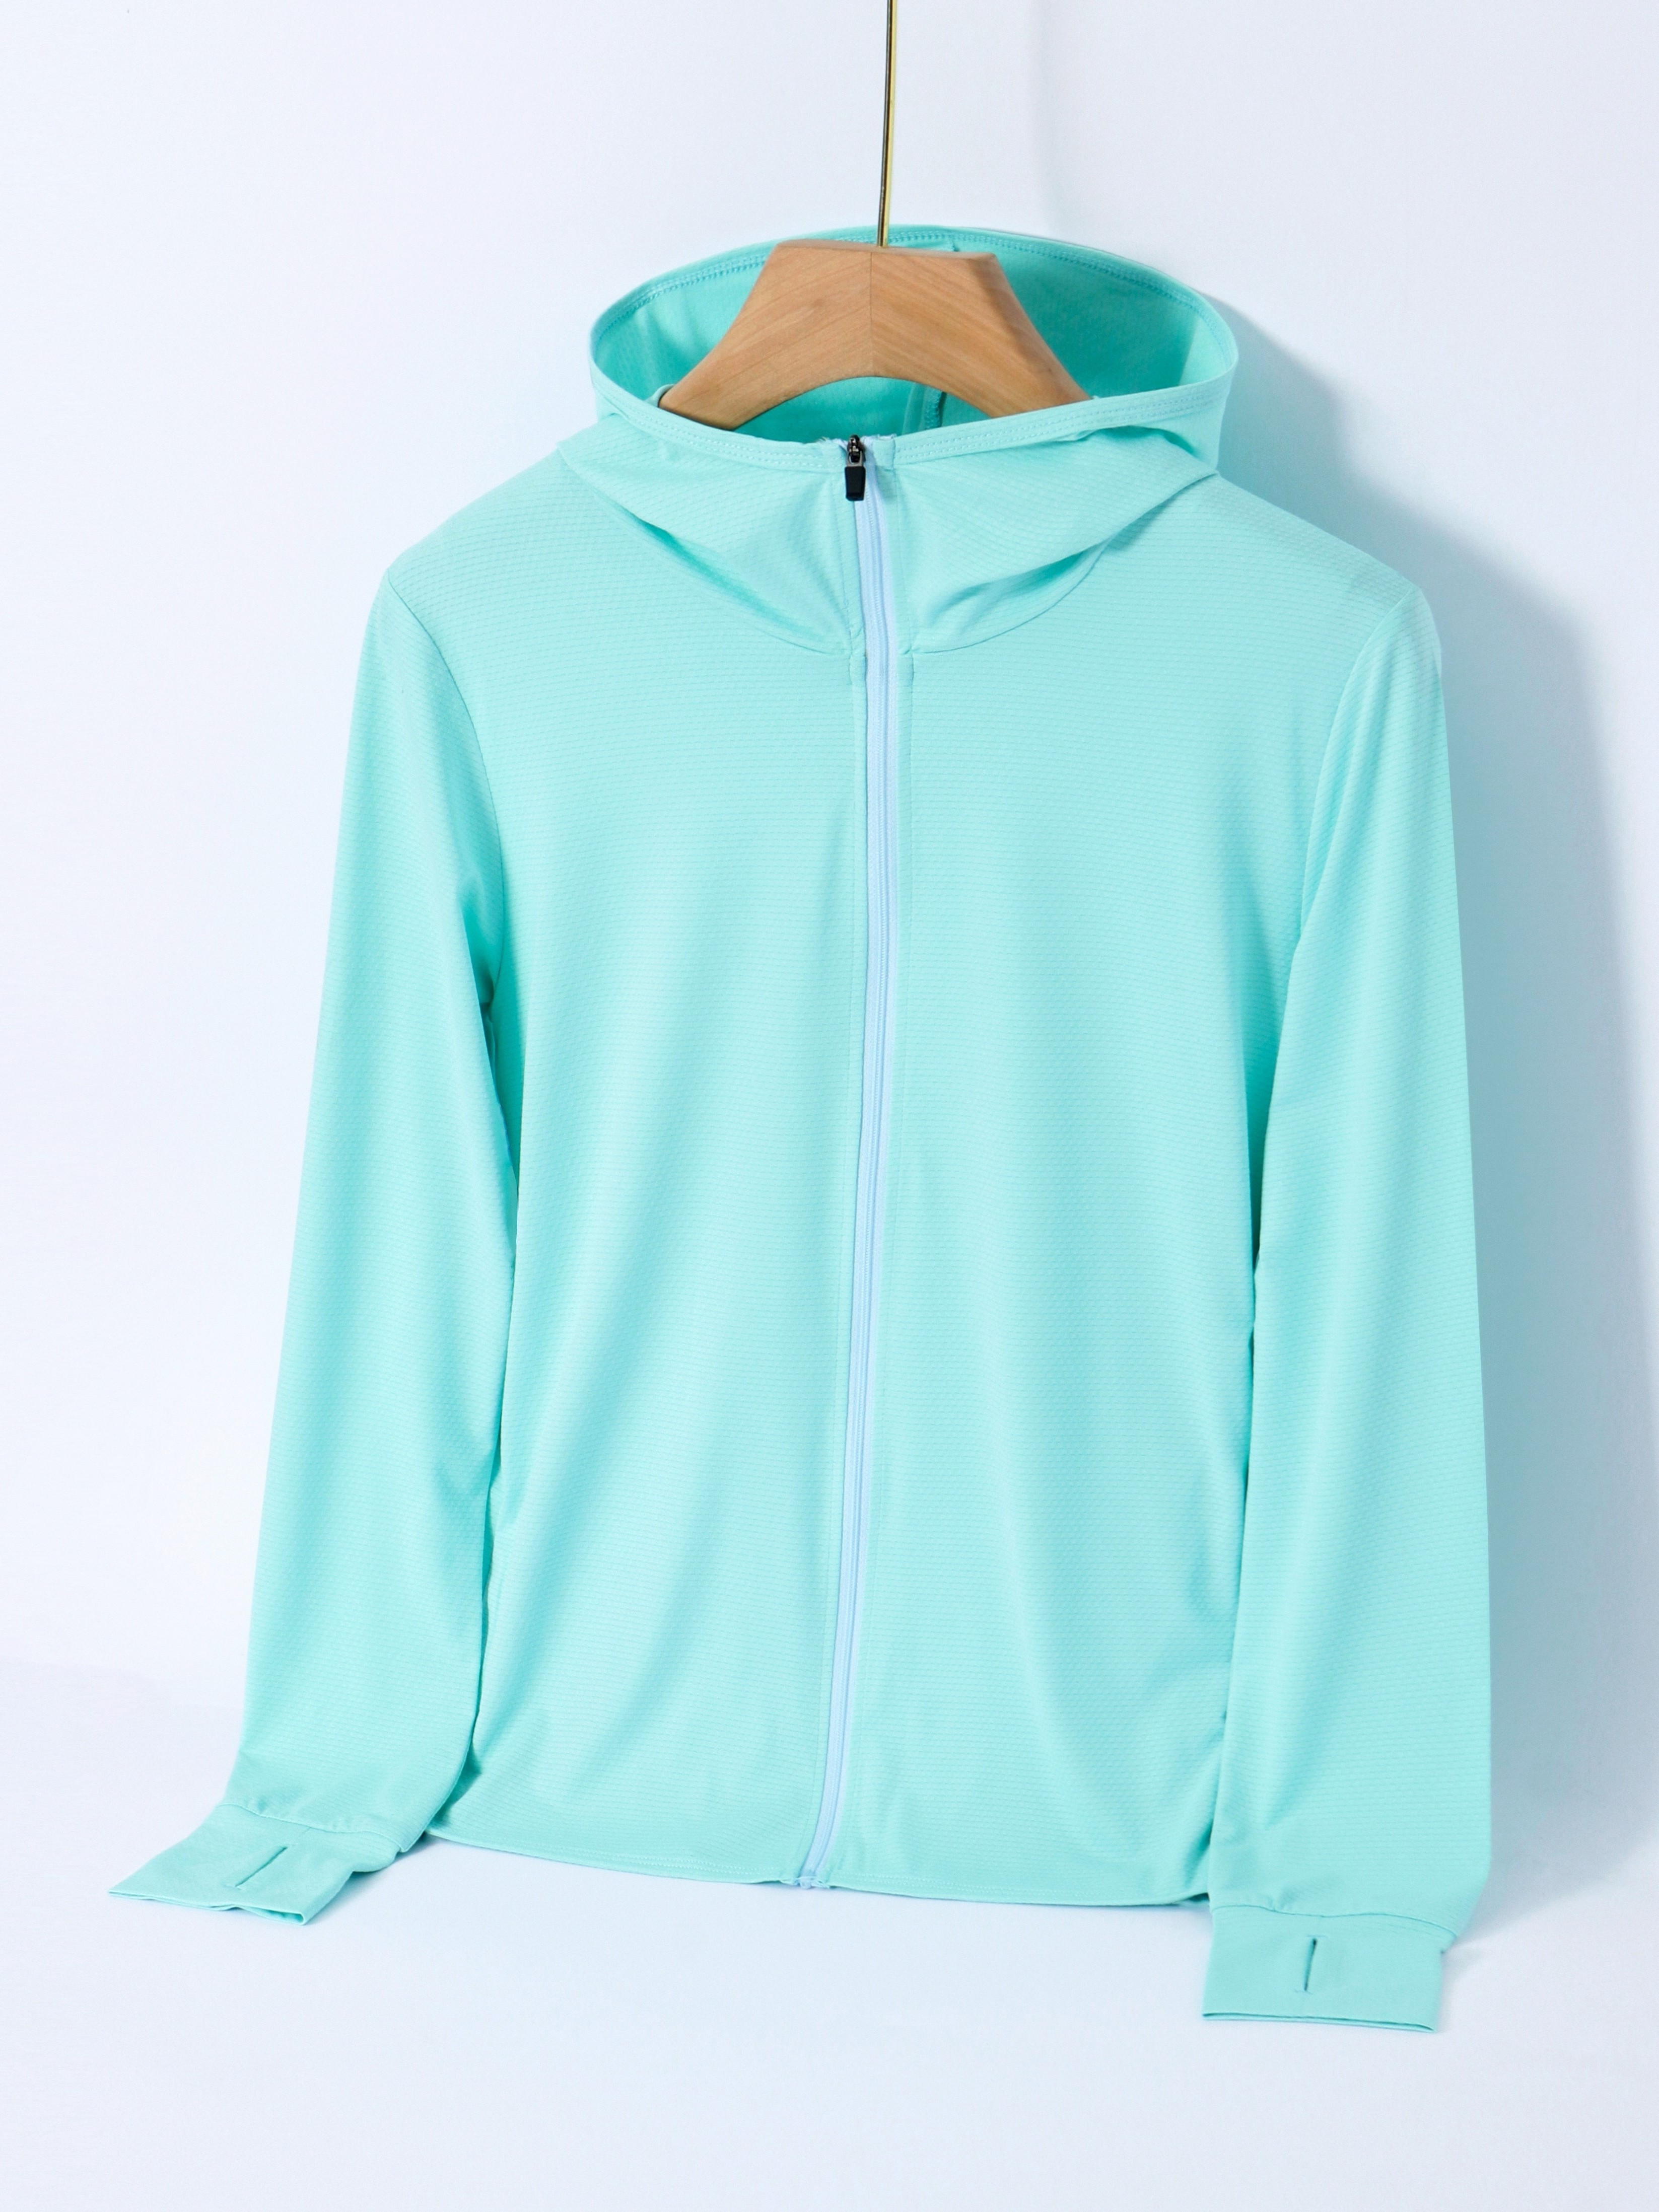 Uniqlo Airism UV Protection Zipped Jacket(Women) - Teal 